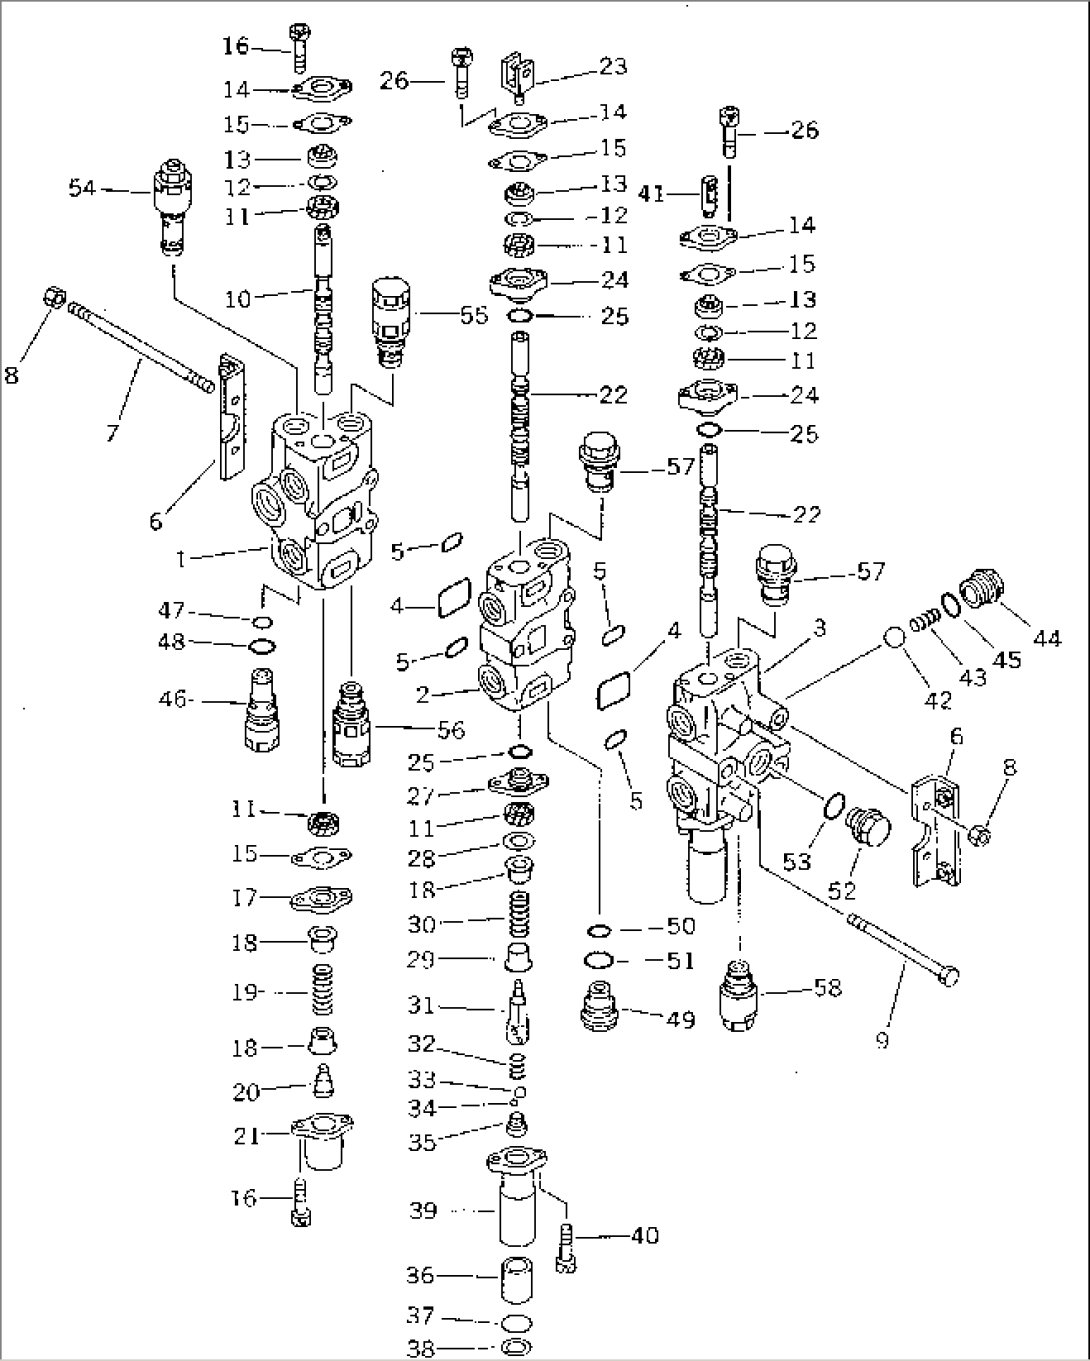 WORK EQUIPMENT CONTROL VALVE (1/2) (FOR 3-POINT HITCH)